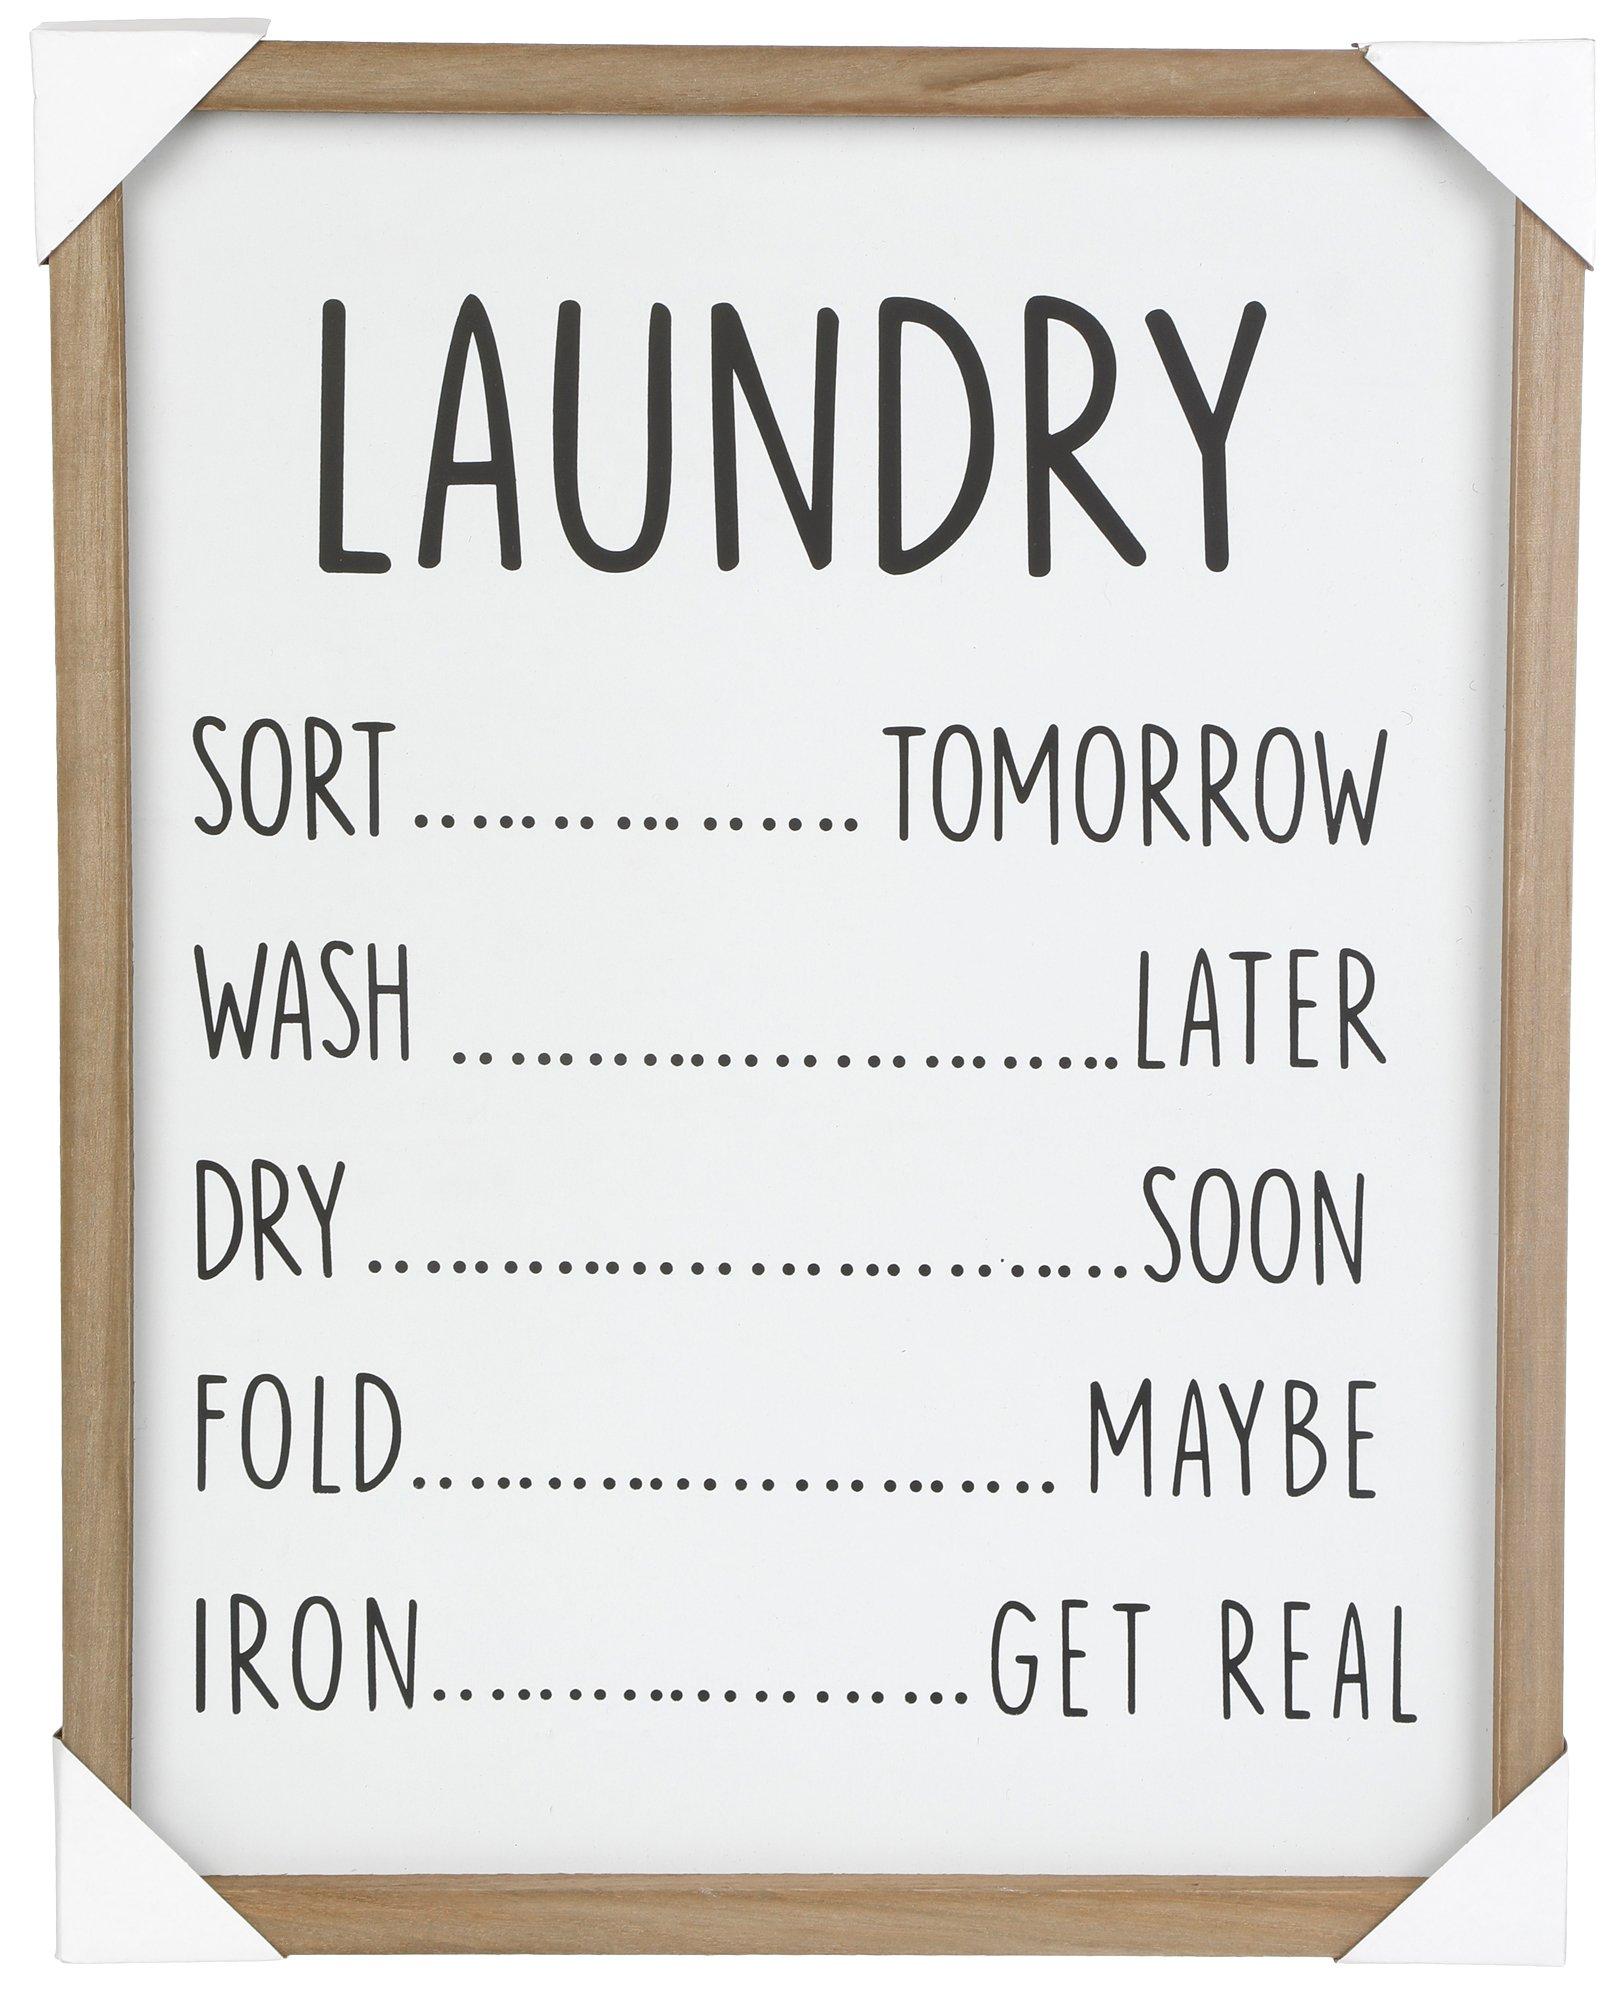 16x20 Laundry Schedule Wall Home Accent